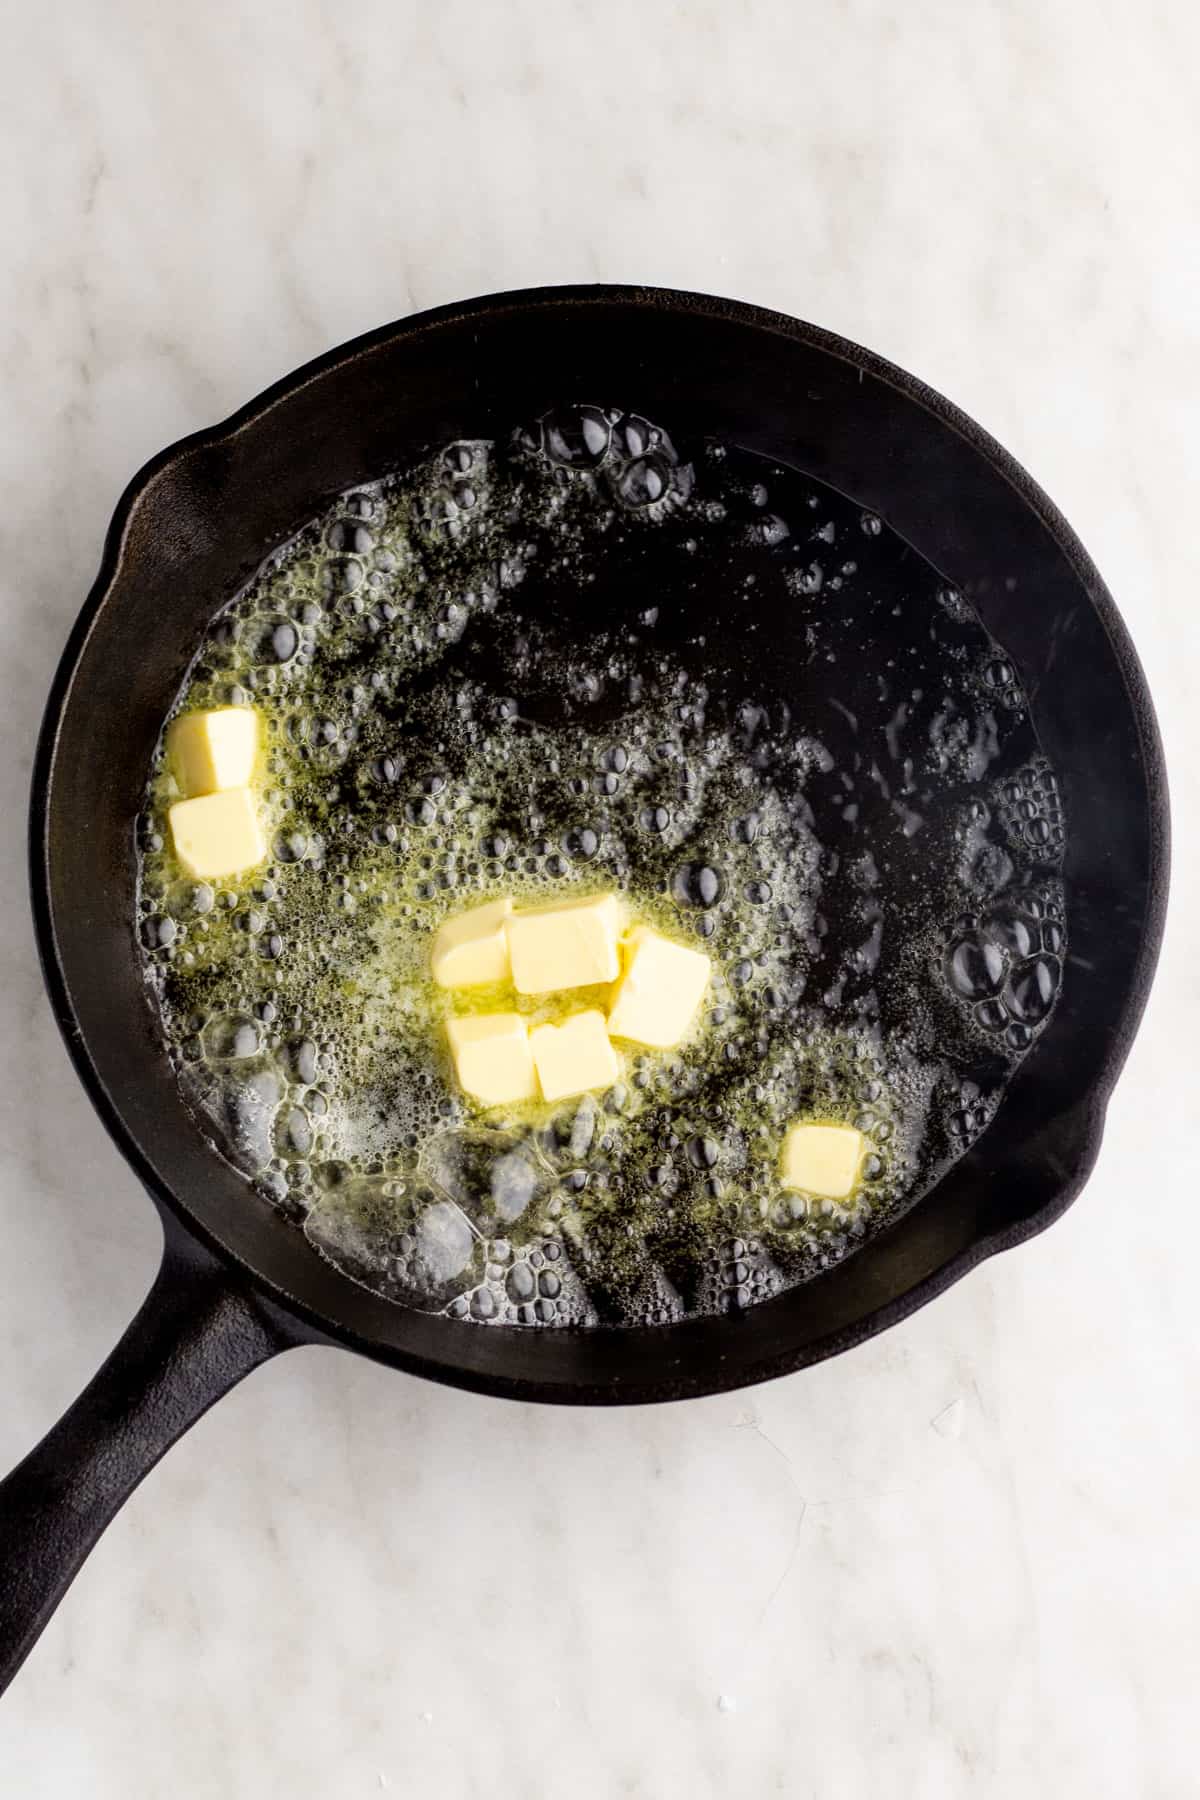 Butter melting in hot cast iron skillet.